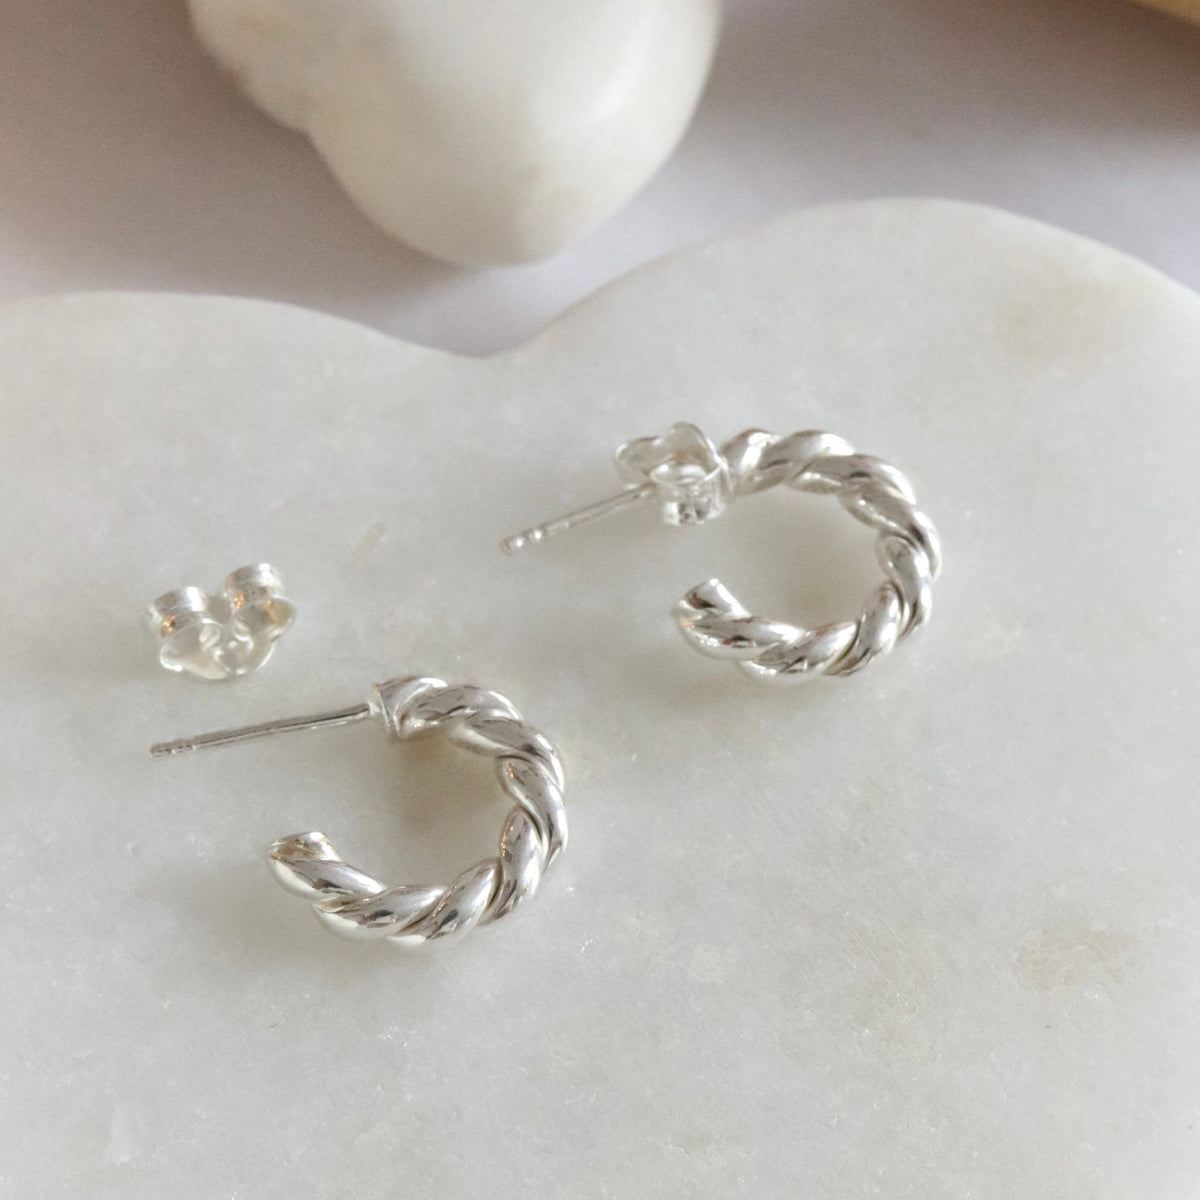 FRAICHE INSPIRE MINI TWISTED CYLINDER HOOPS - SILVER - SO PRETTY CARA COTTER